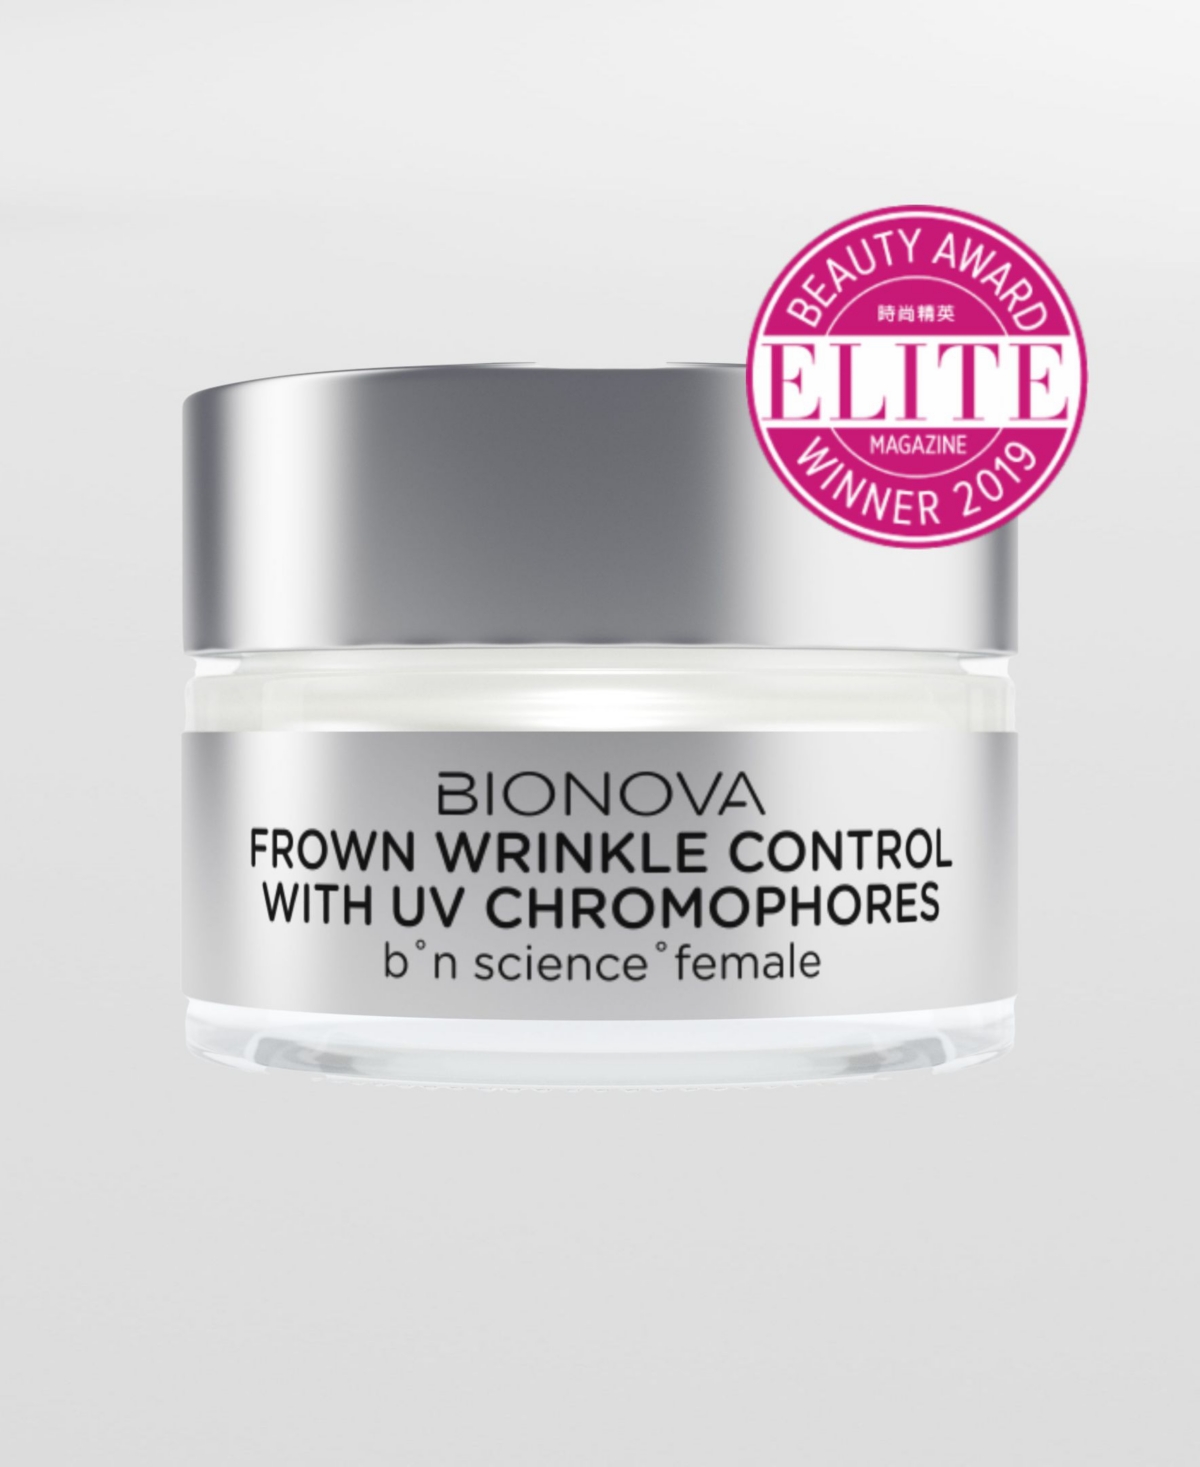 Bionova Frown Wrinkle Control with Uv Chromophores